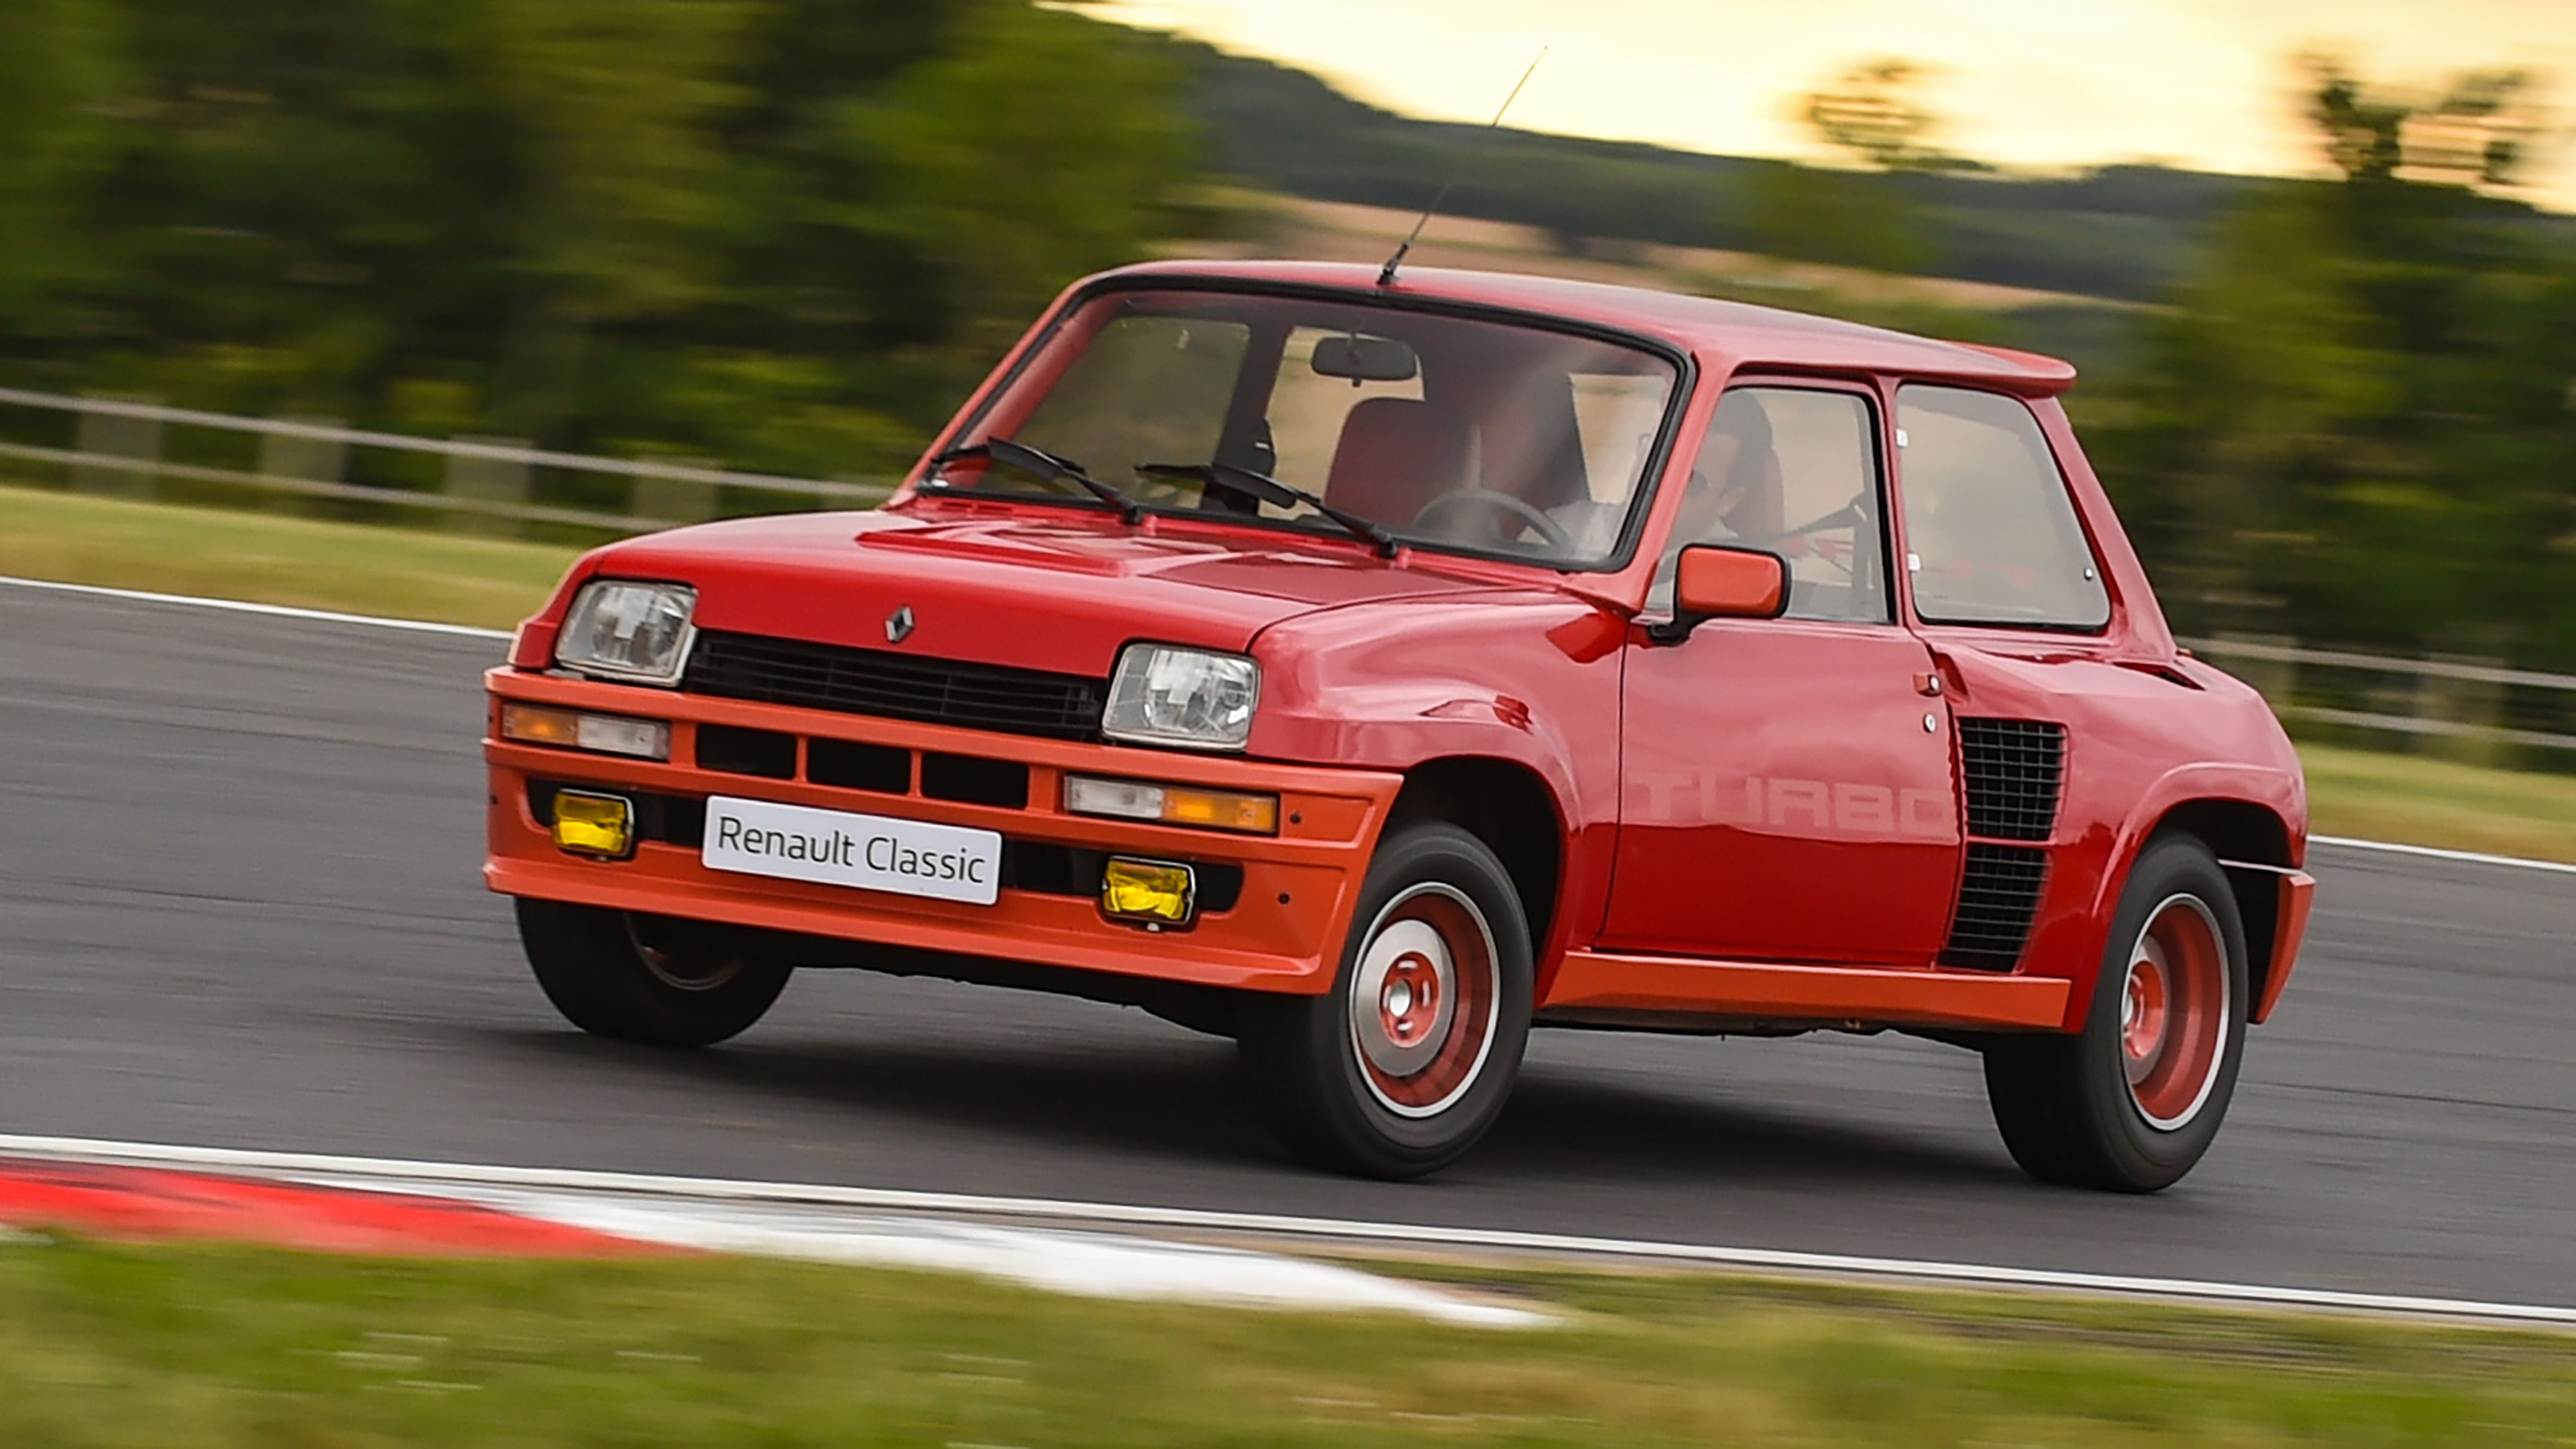 Renault 5 Turbo: review, history and specs of icon | evo